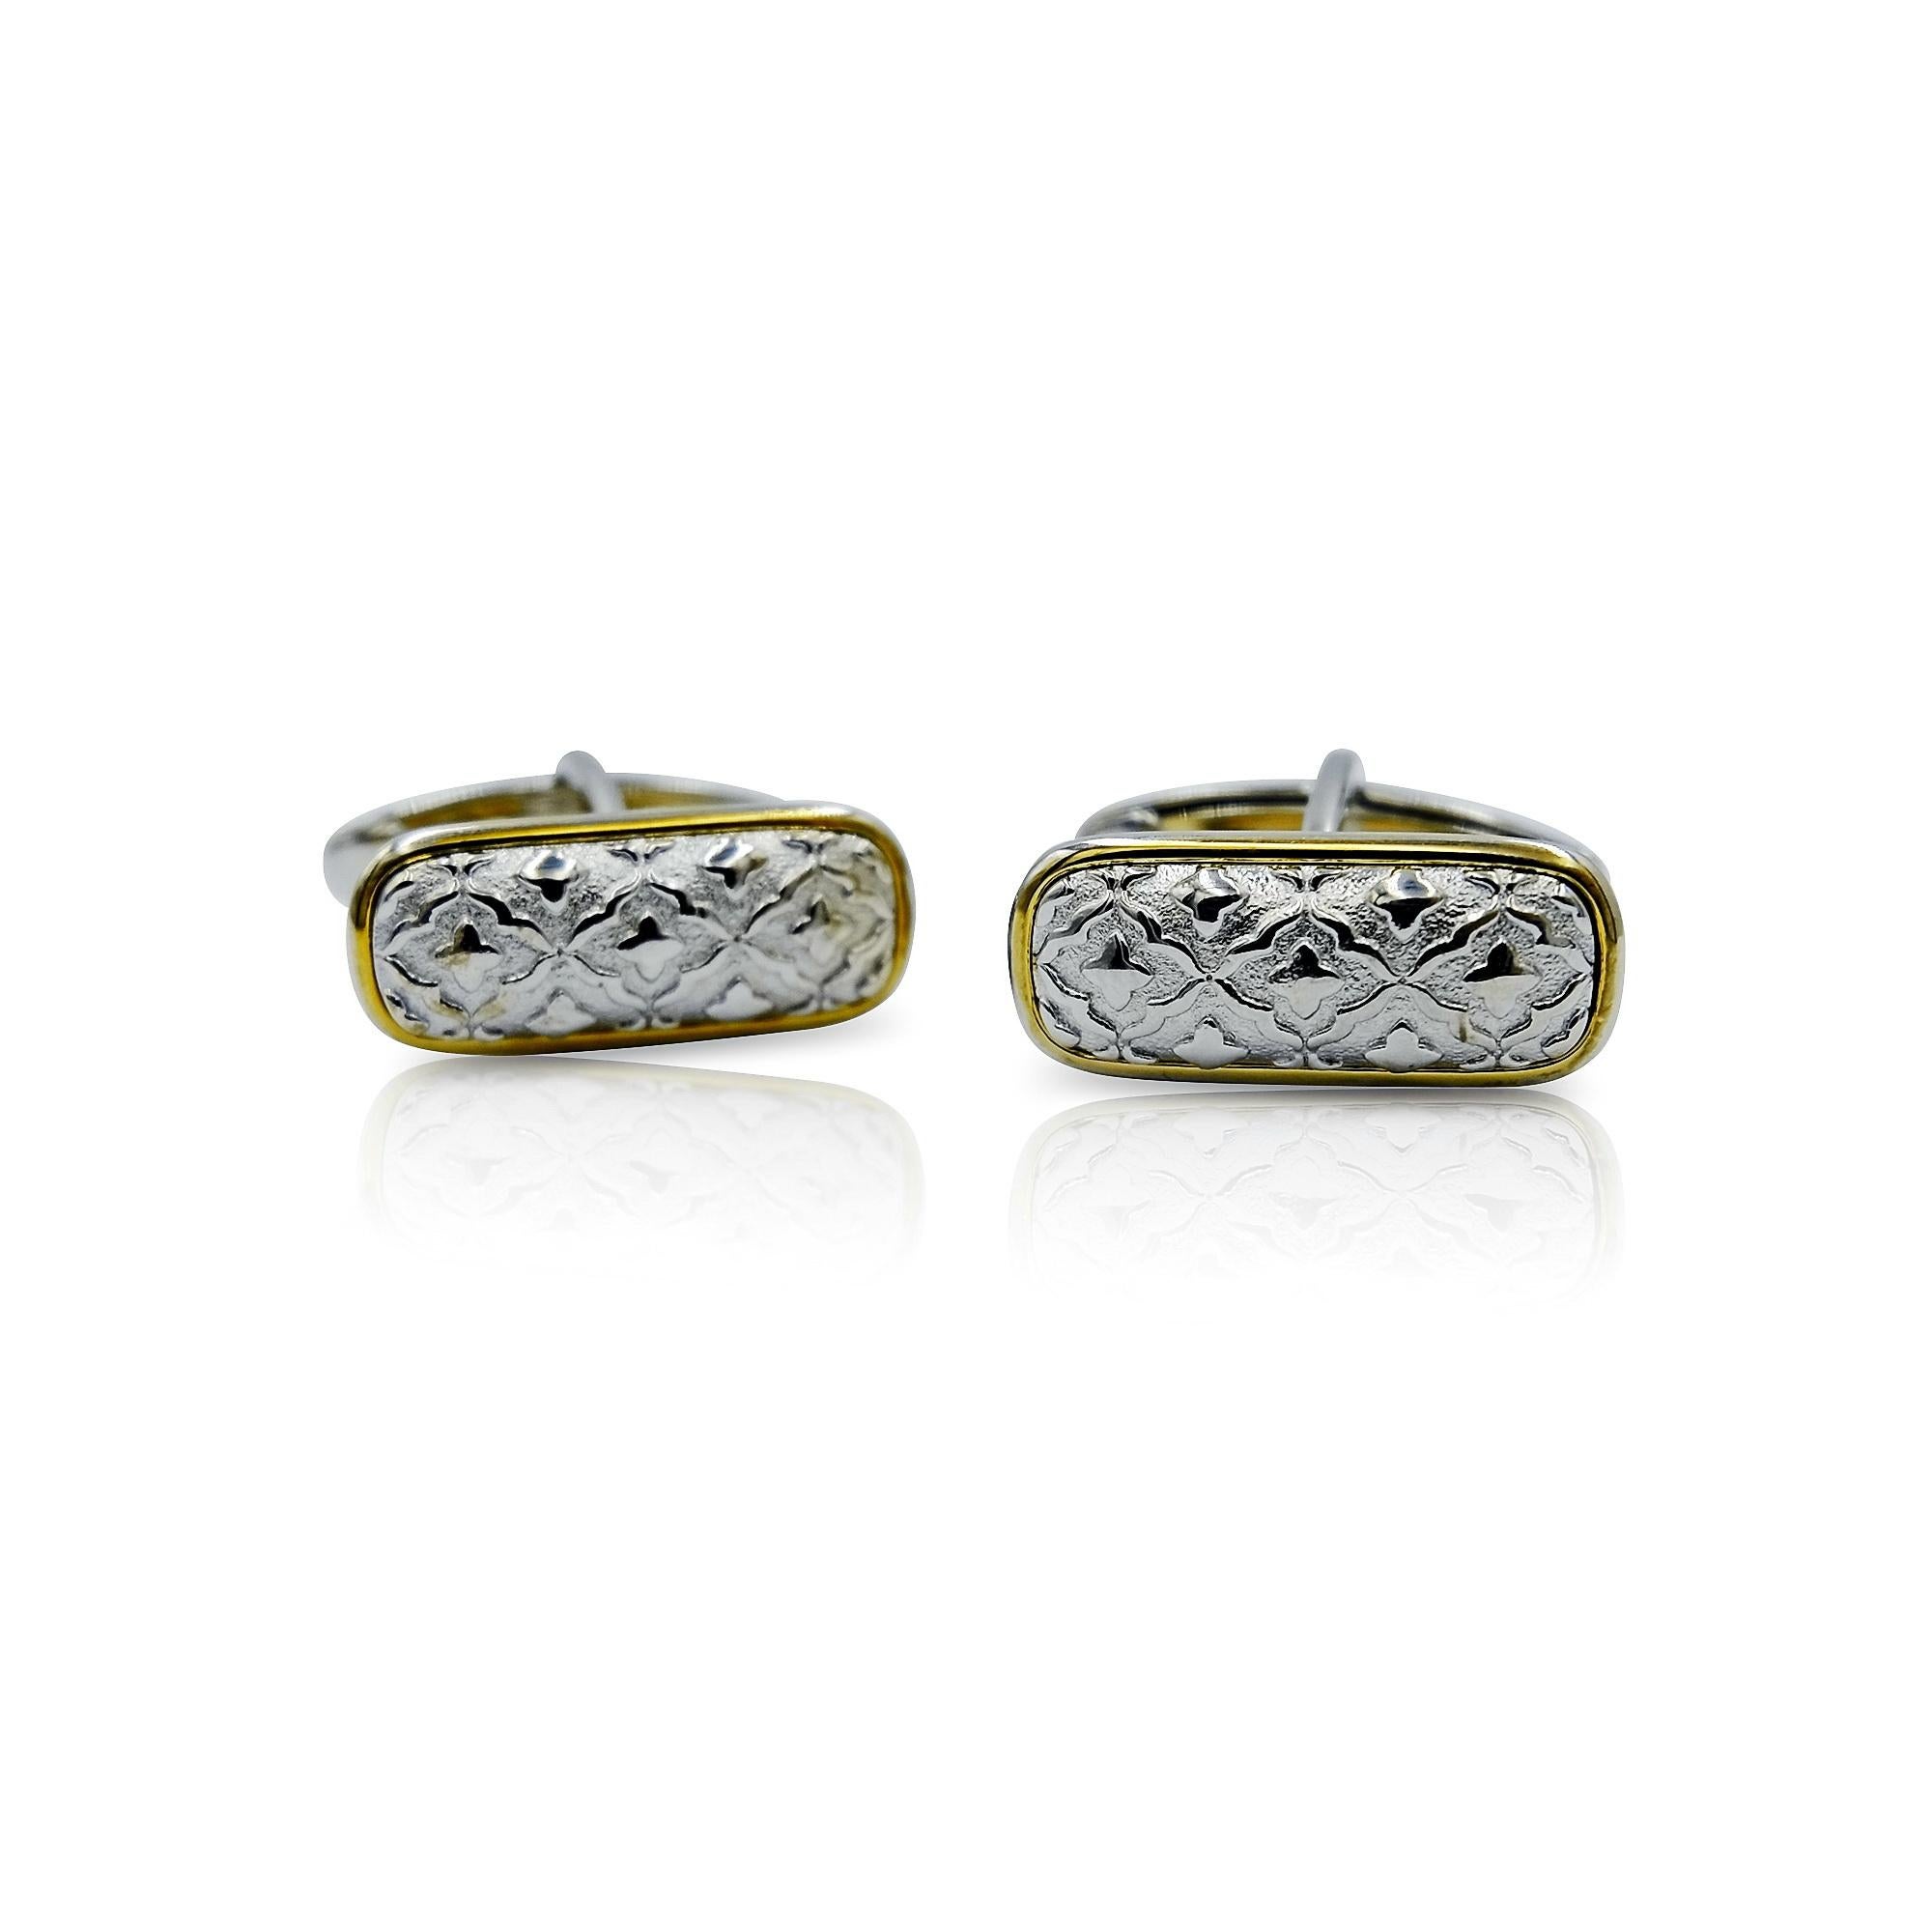 Luca Jouel Decorative Cufflinks Trio in Yellow Gold and Silver In New Condition For Sale In South Perth, AU